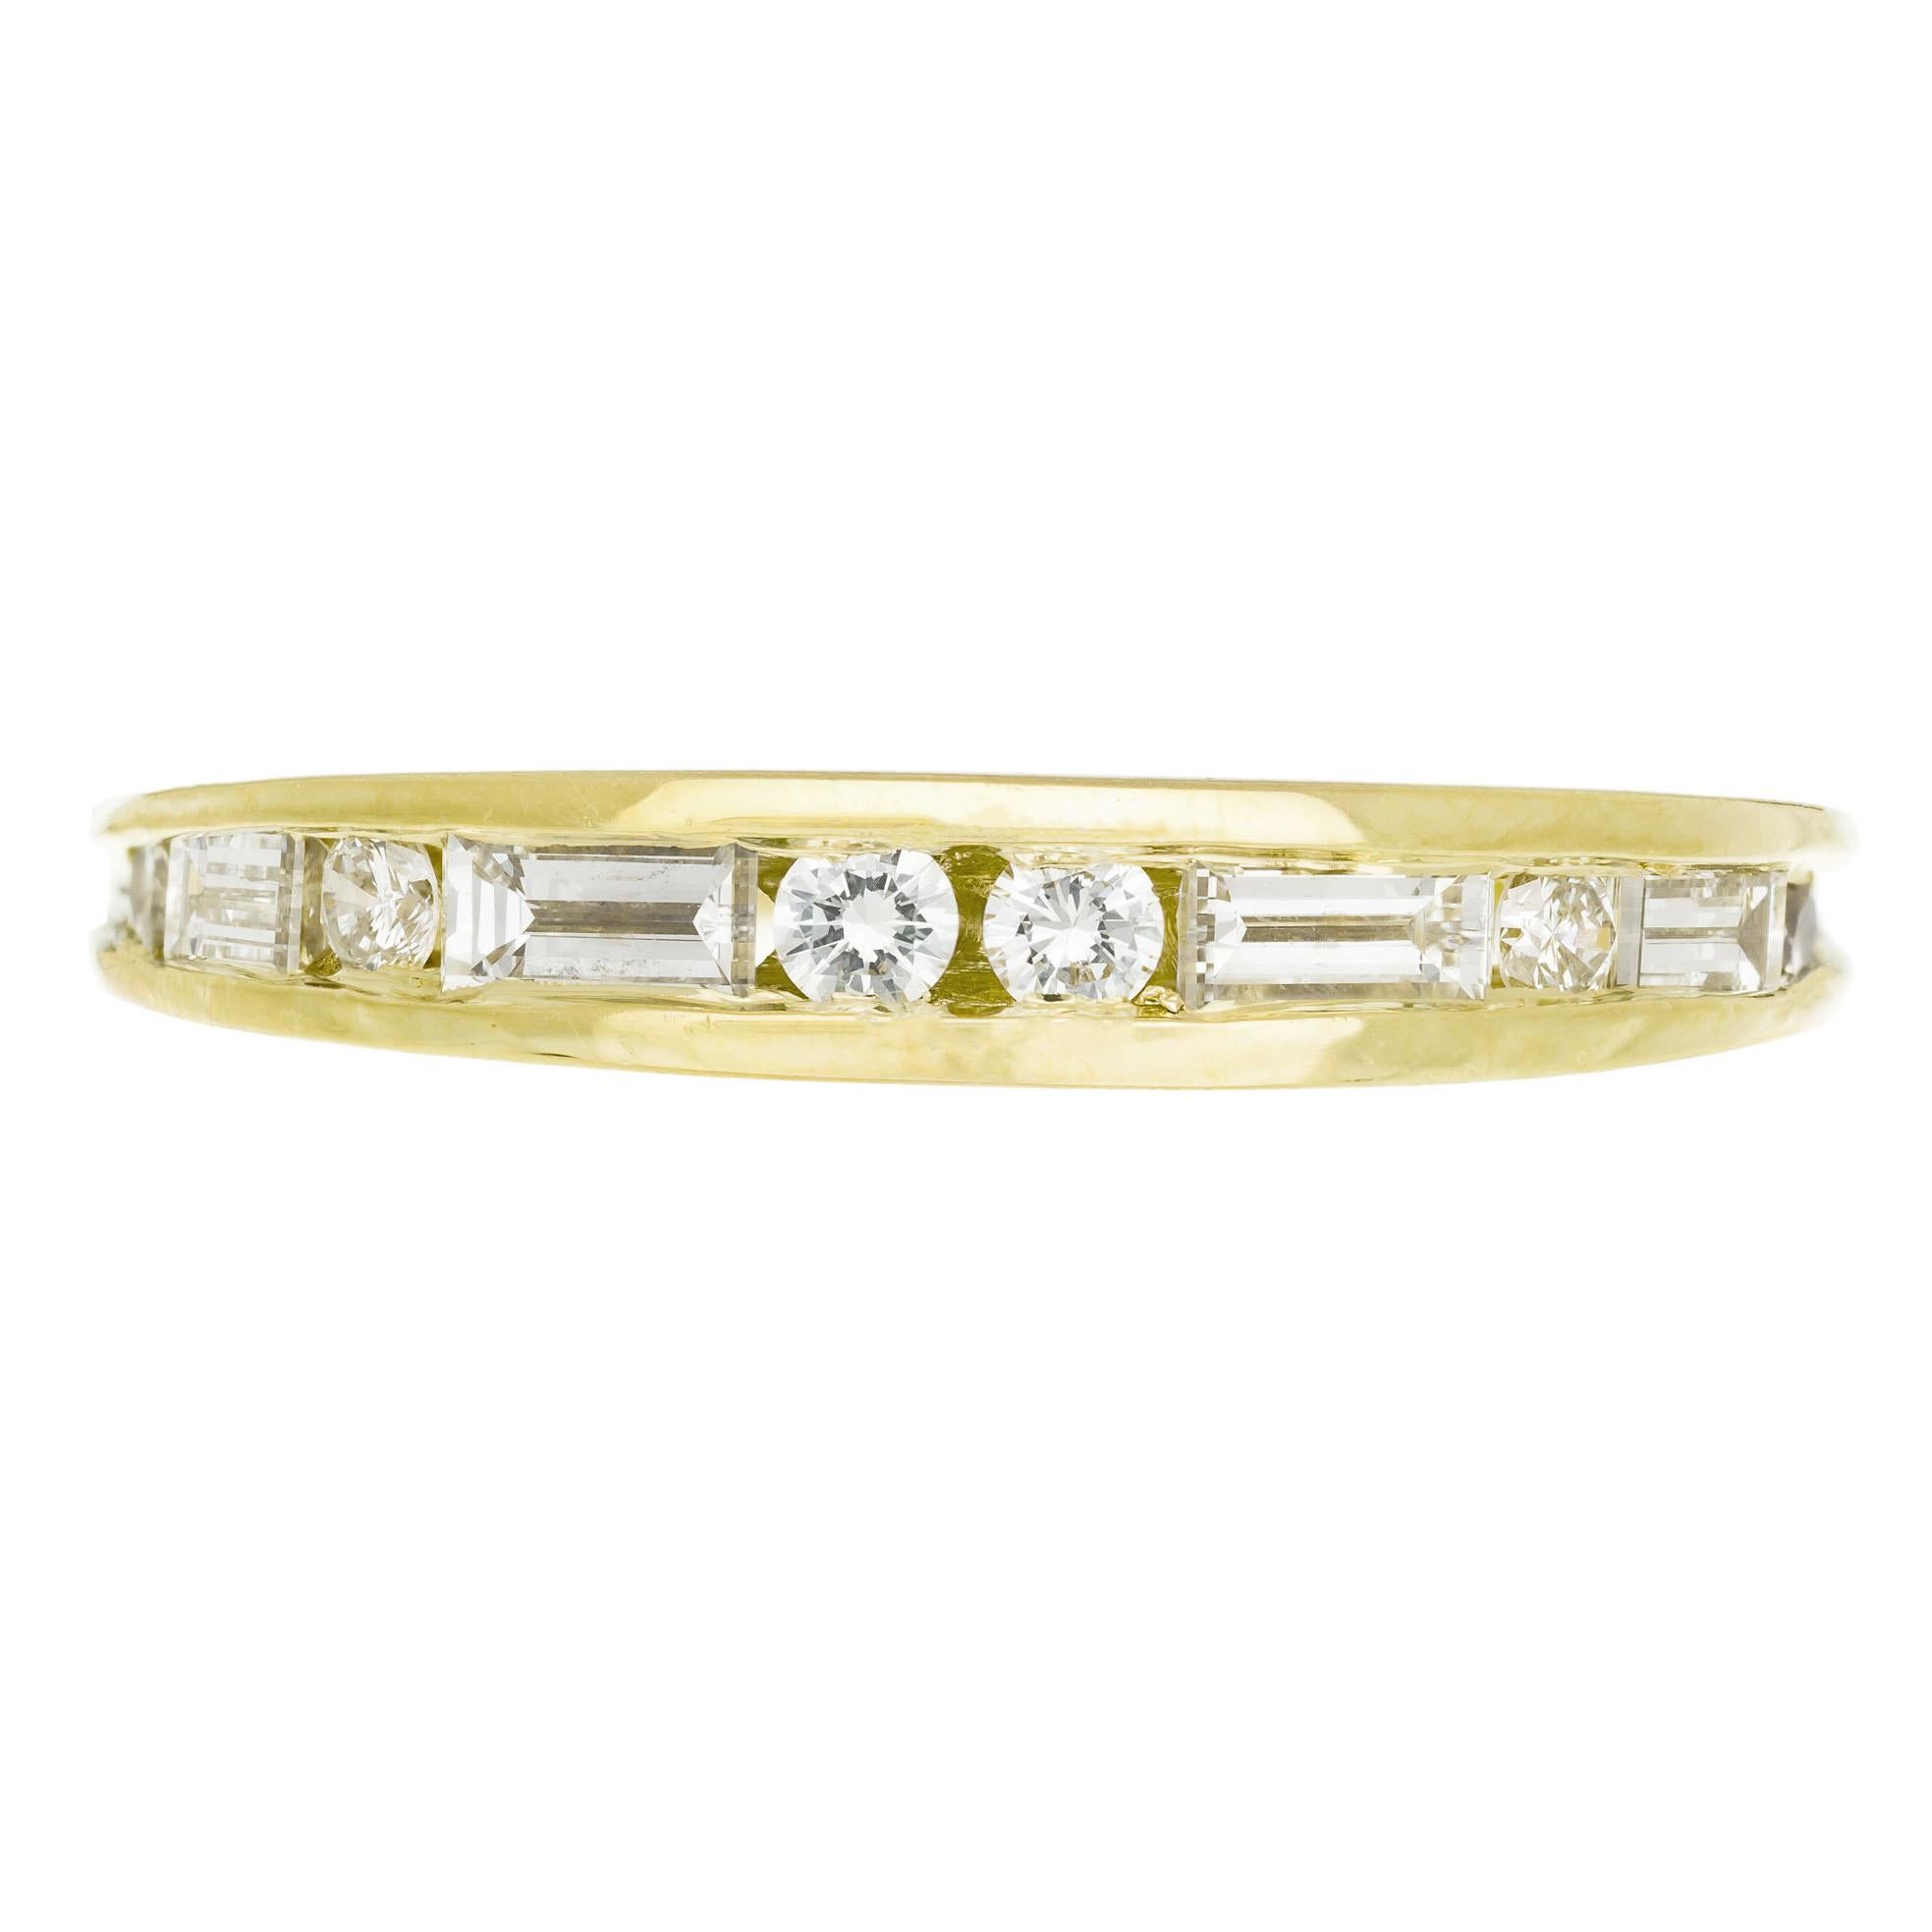 Domed diamond channel set wedding band. 18k yellow gold with 6 round brilliant cut and 4 step cut baguette diamonds. 

6 round brilliant cut diamonds, H VS approx. .12cts
4 step cut baguette diamonds, H VS approx. .14cts
Size 6 and sizable
18k